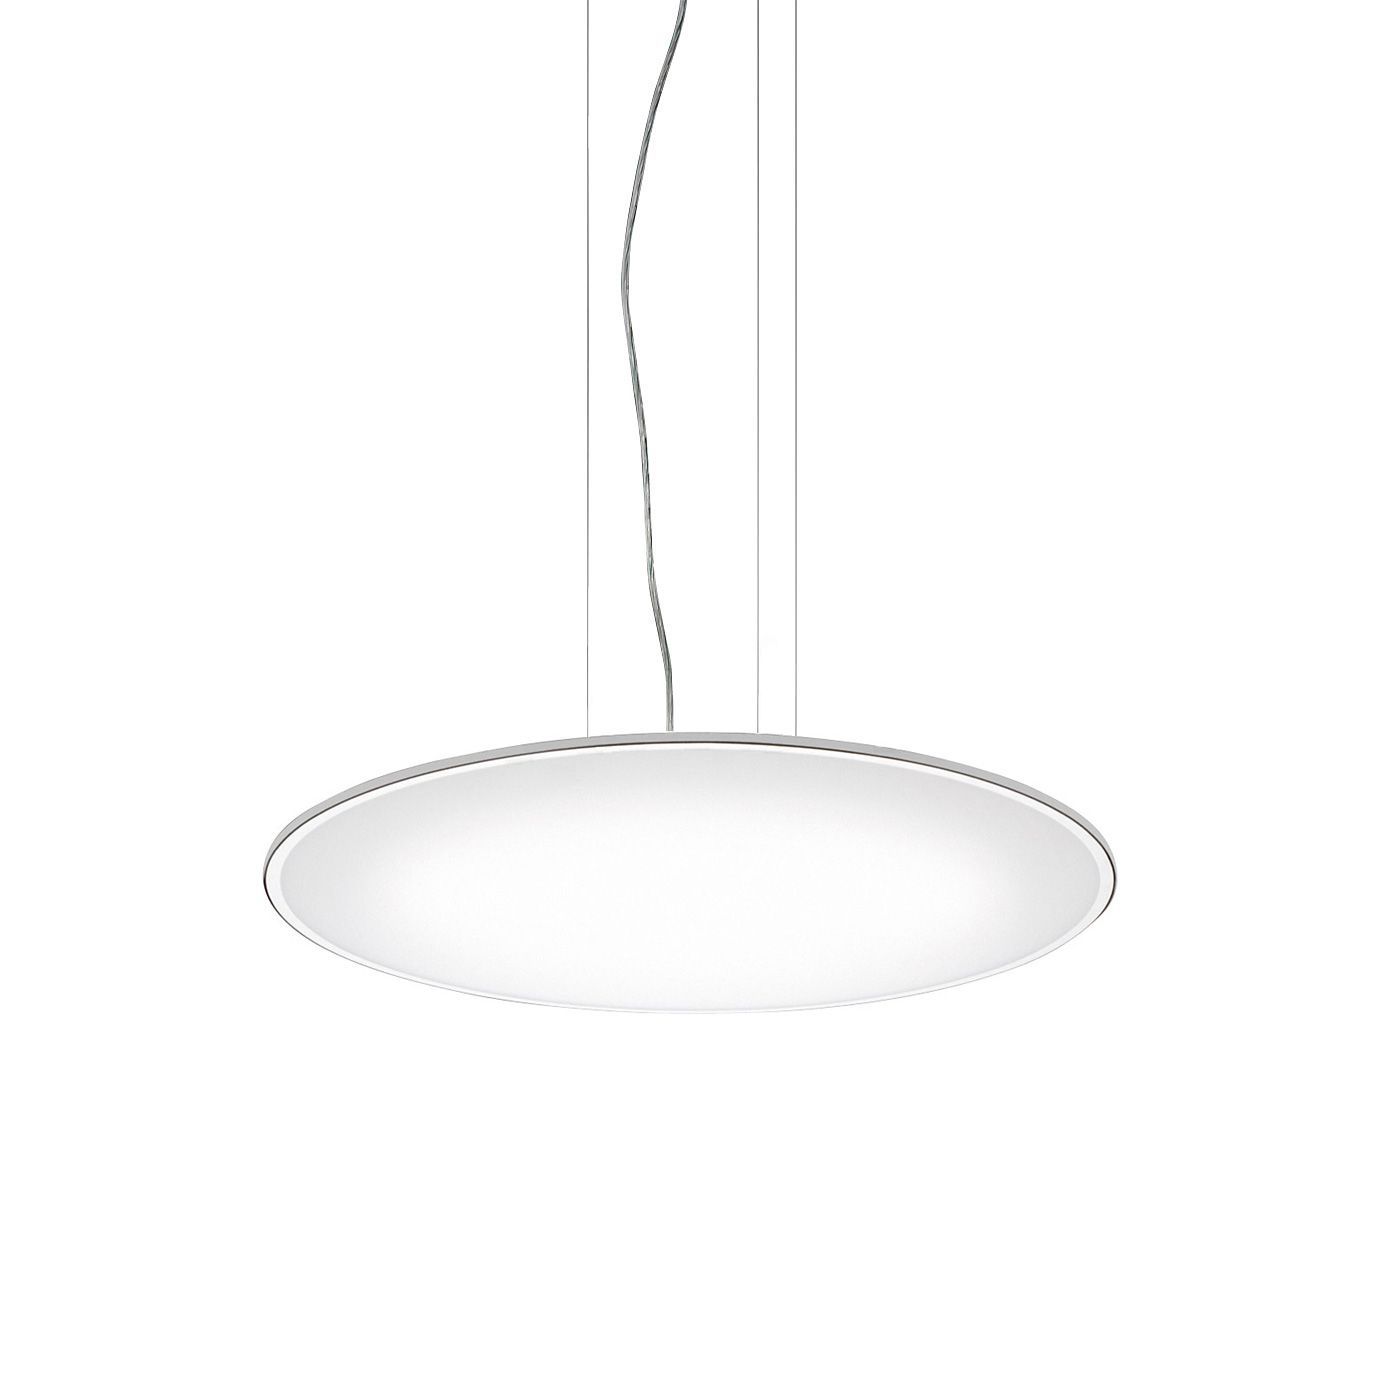 Pendant lamp Big by Vibia